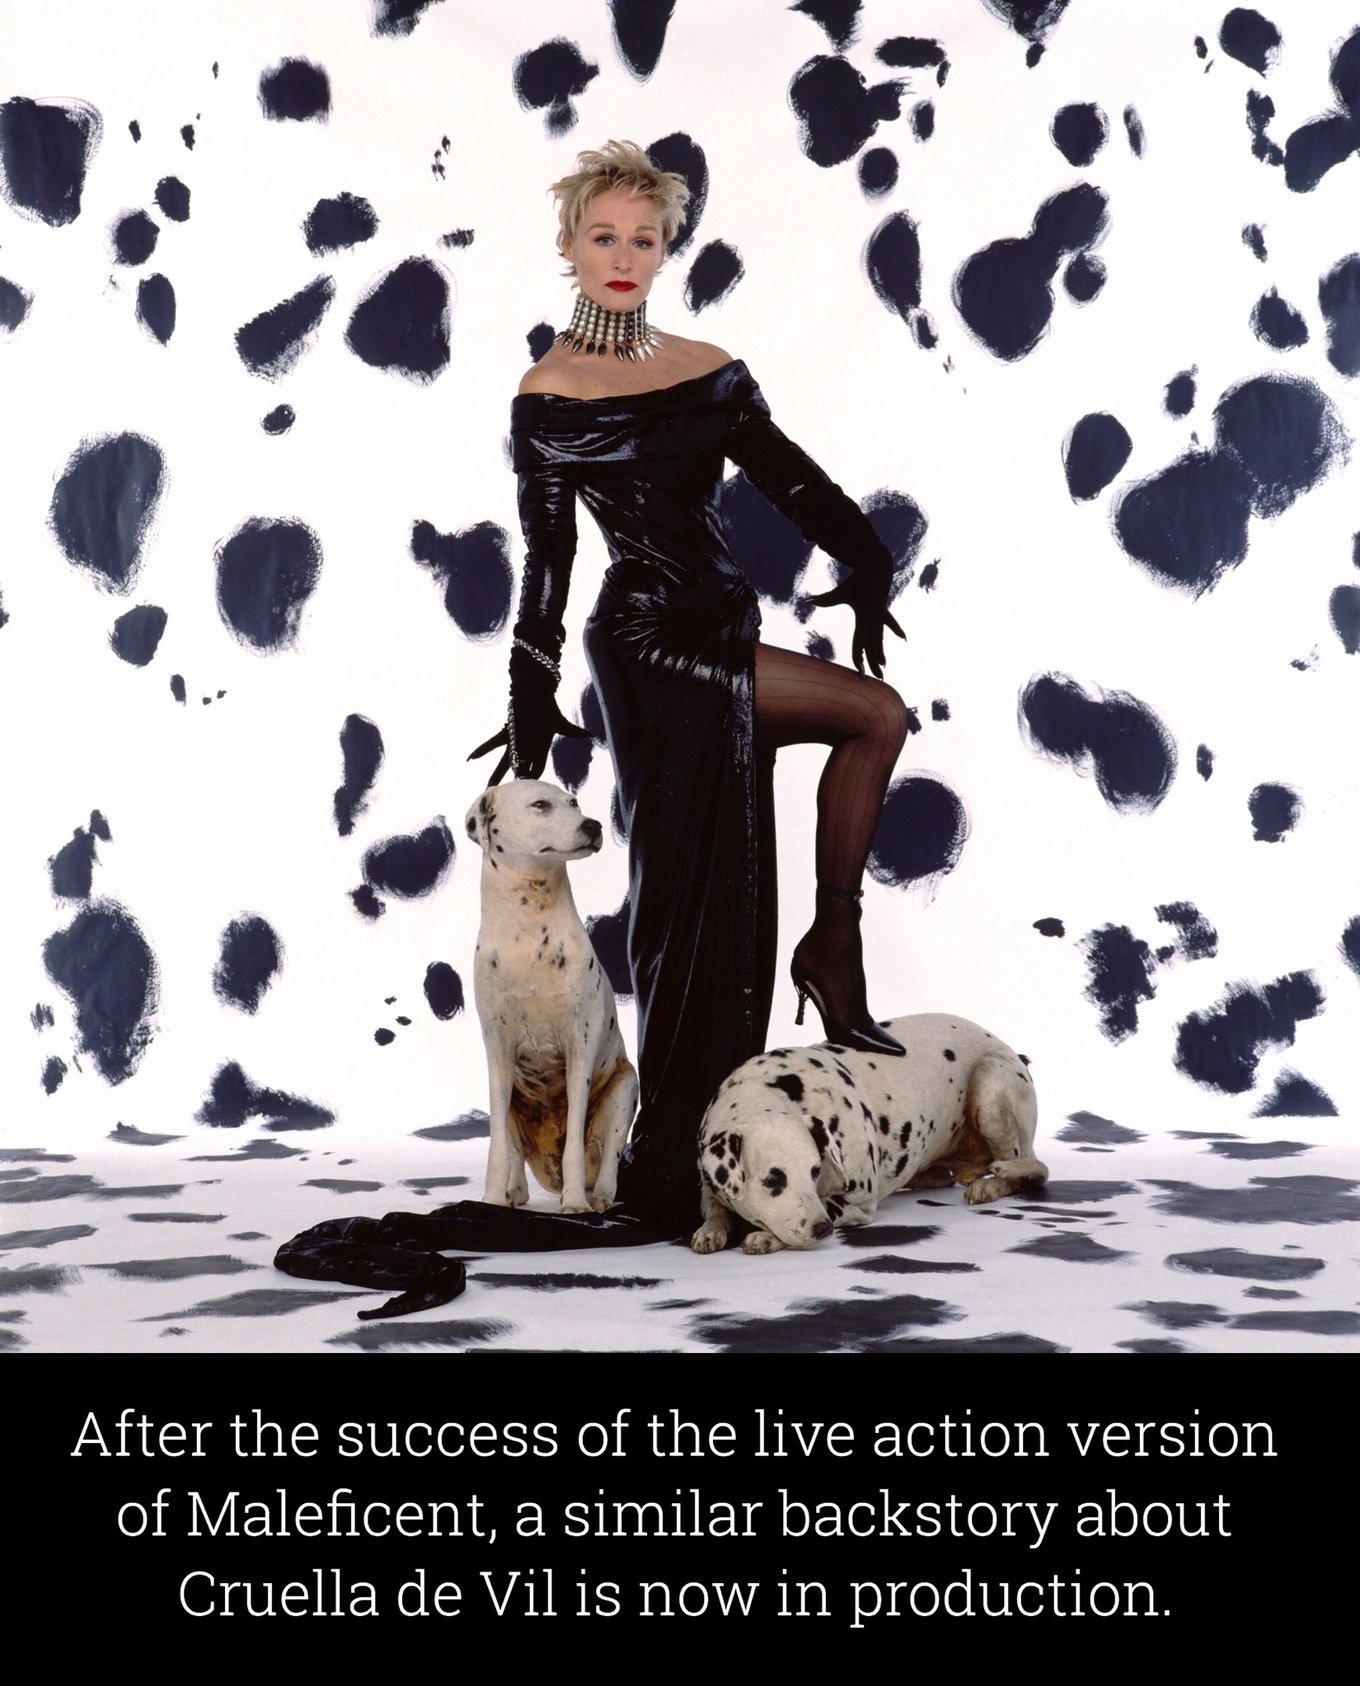 glenn close in 101 dalmatians - After the success of the live action version of Maleficent, a similar backstory about Cruella de Vil is now in production.